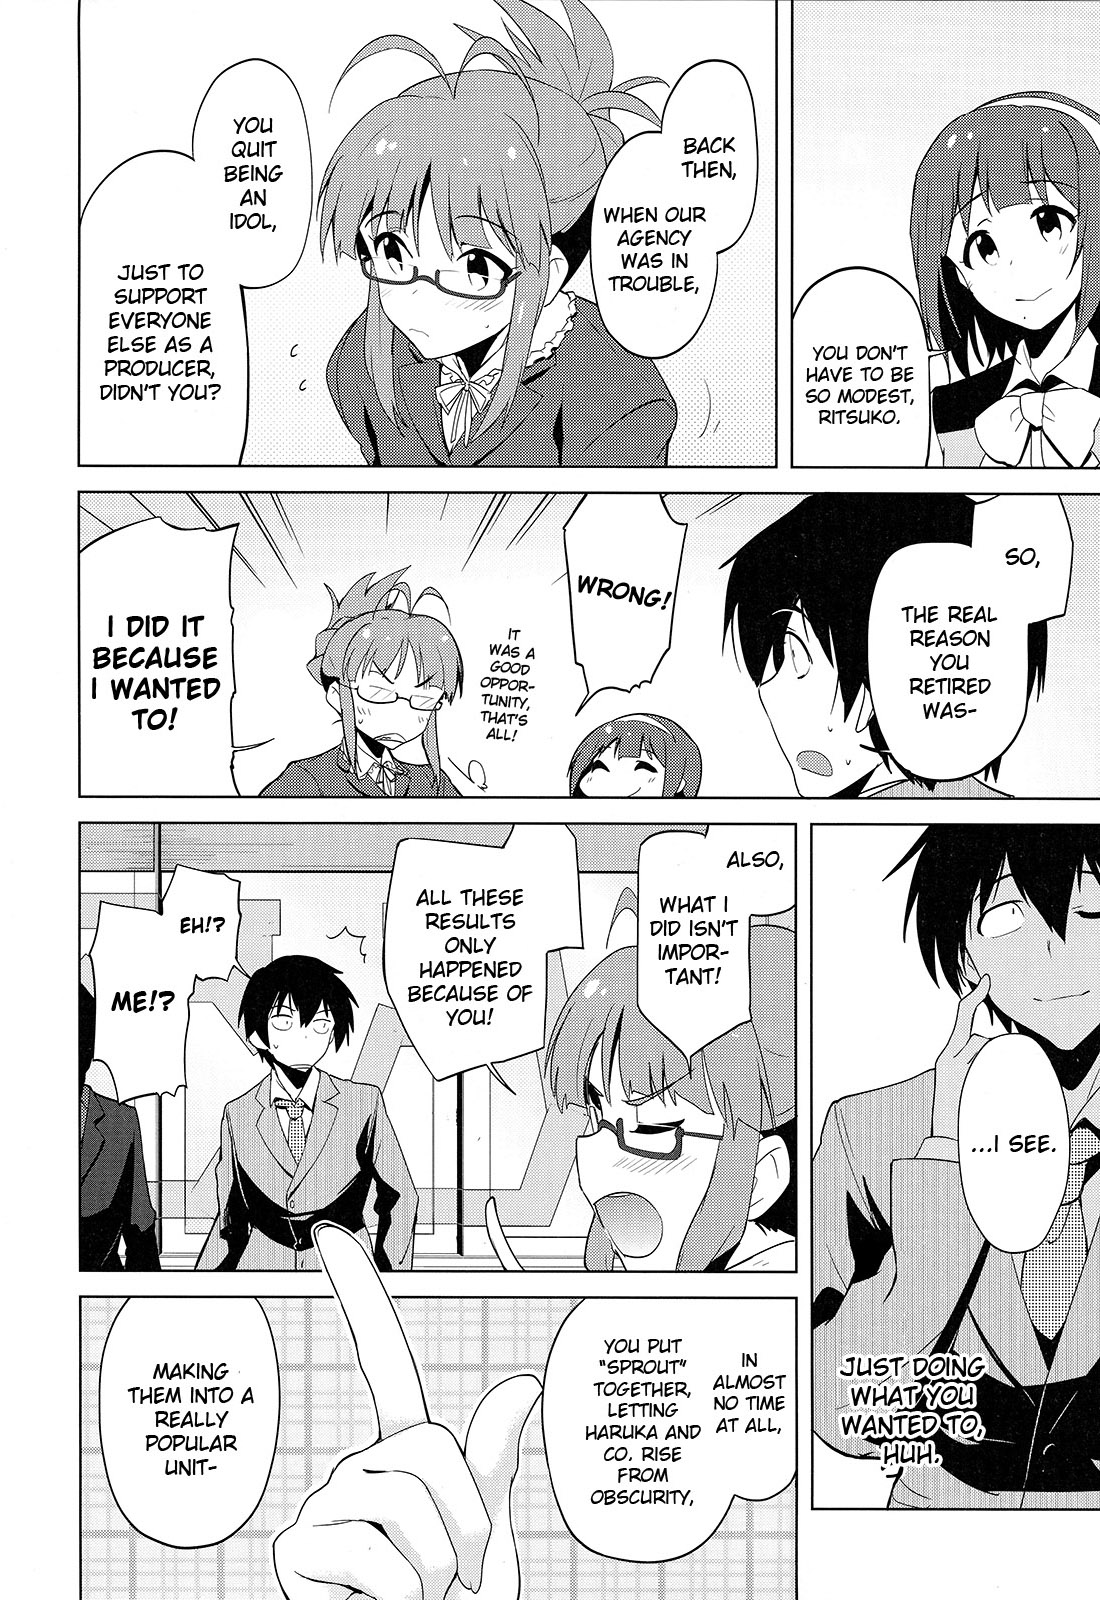 THE iDOLM@STER 2 The world is all one!! Vol. 2 Ch. 16 Budding Motivation, Growing Branches